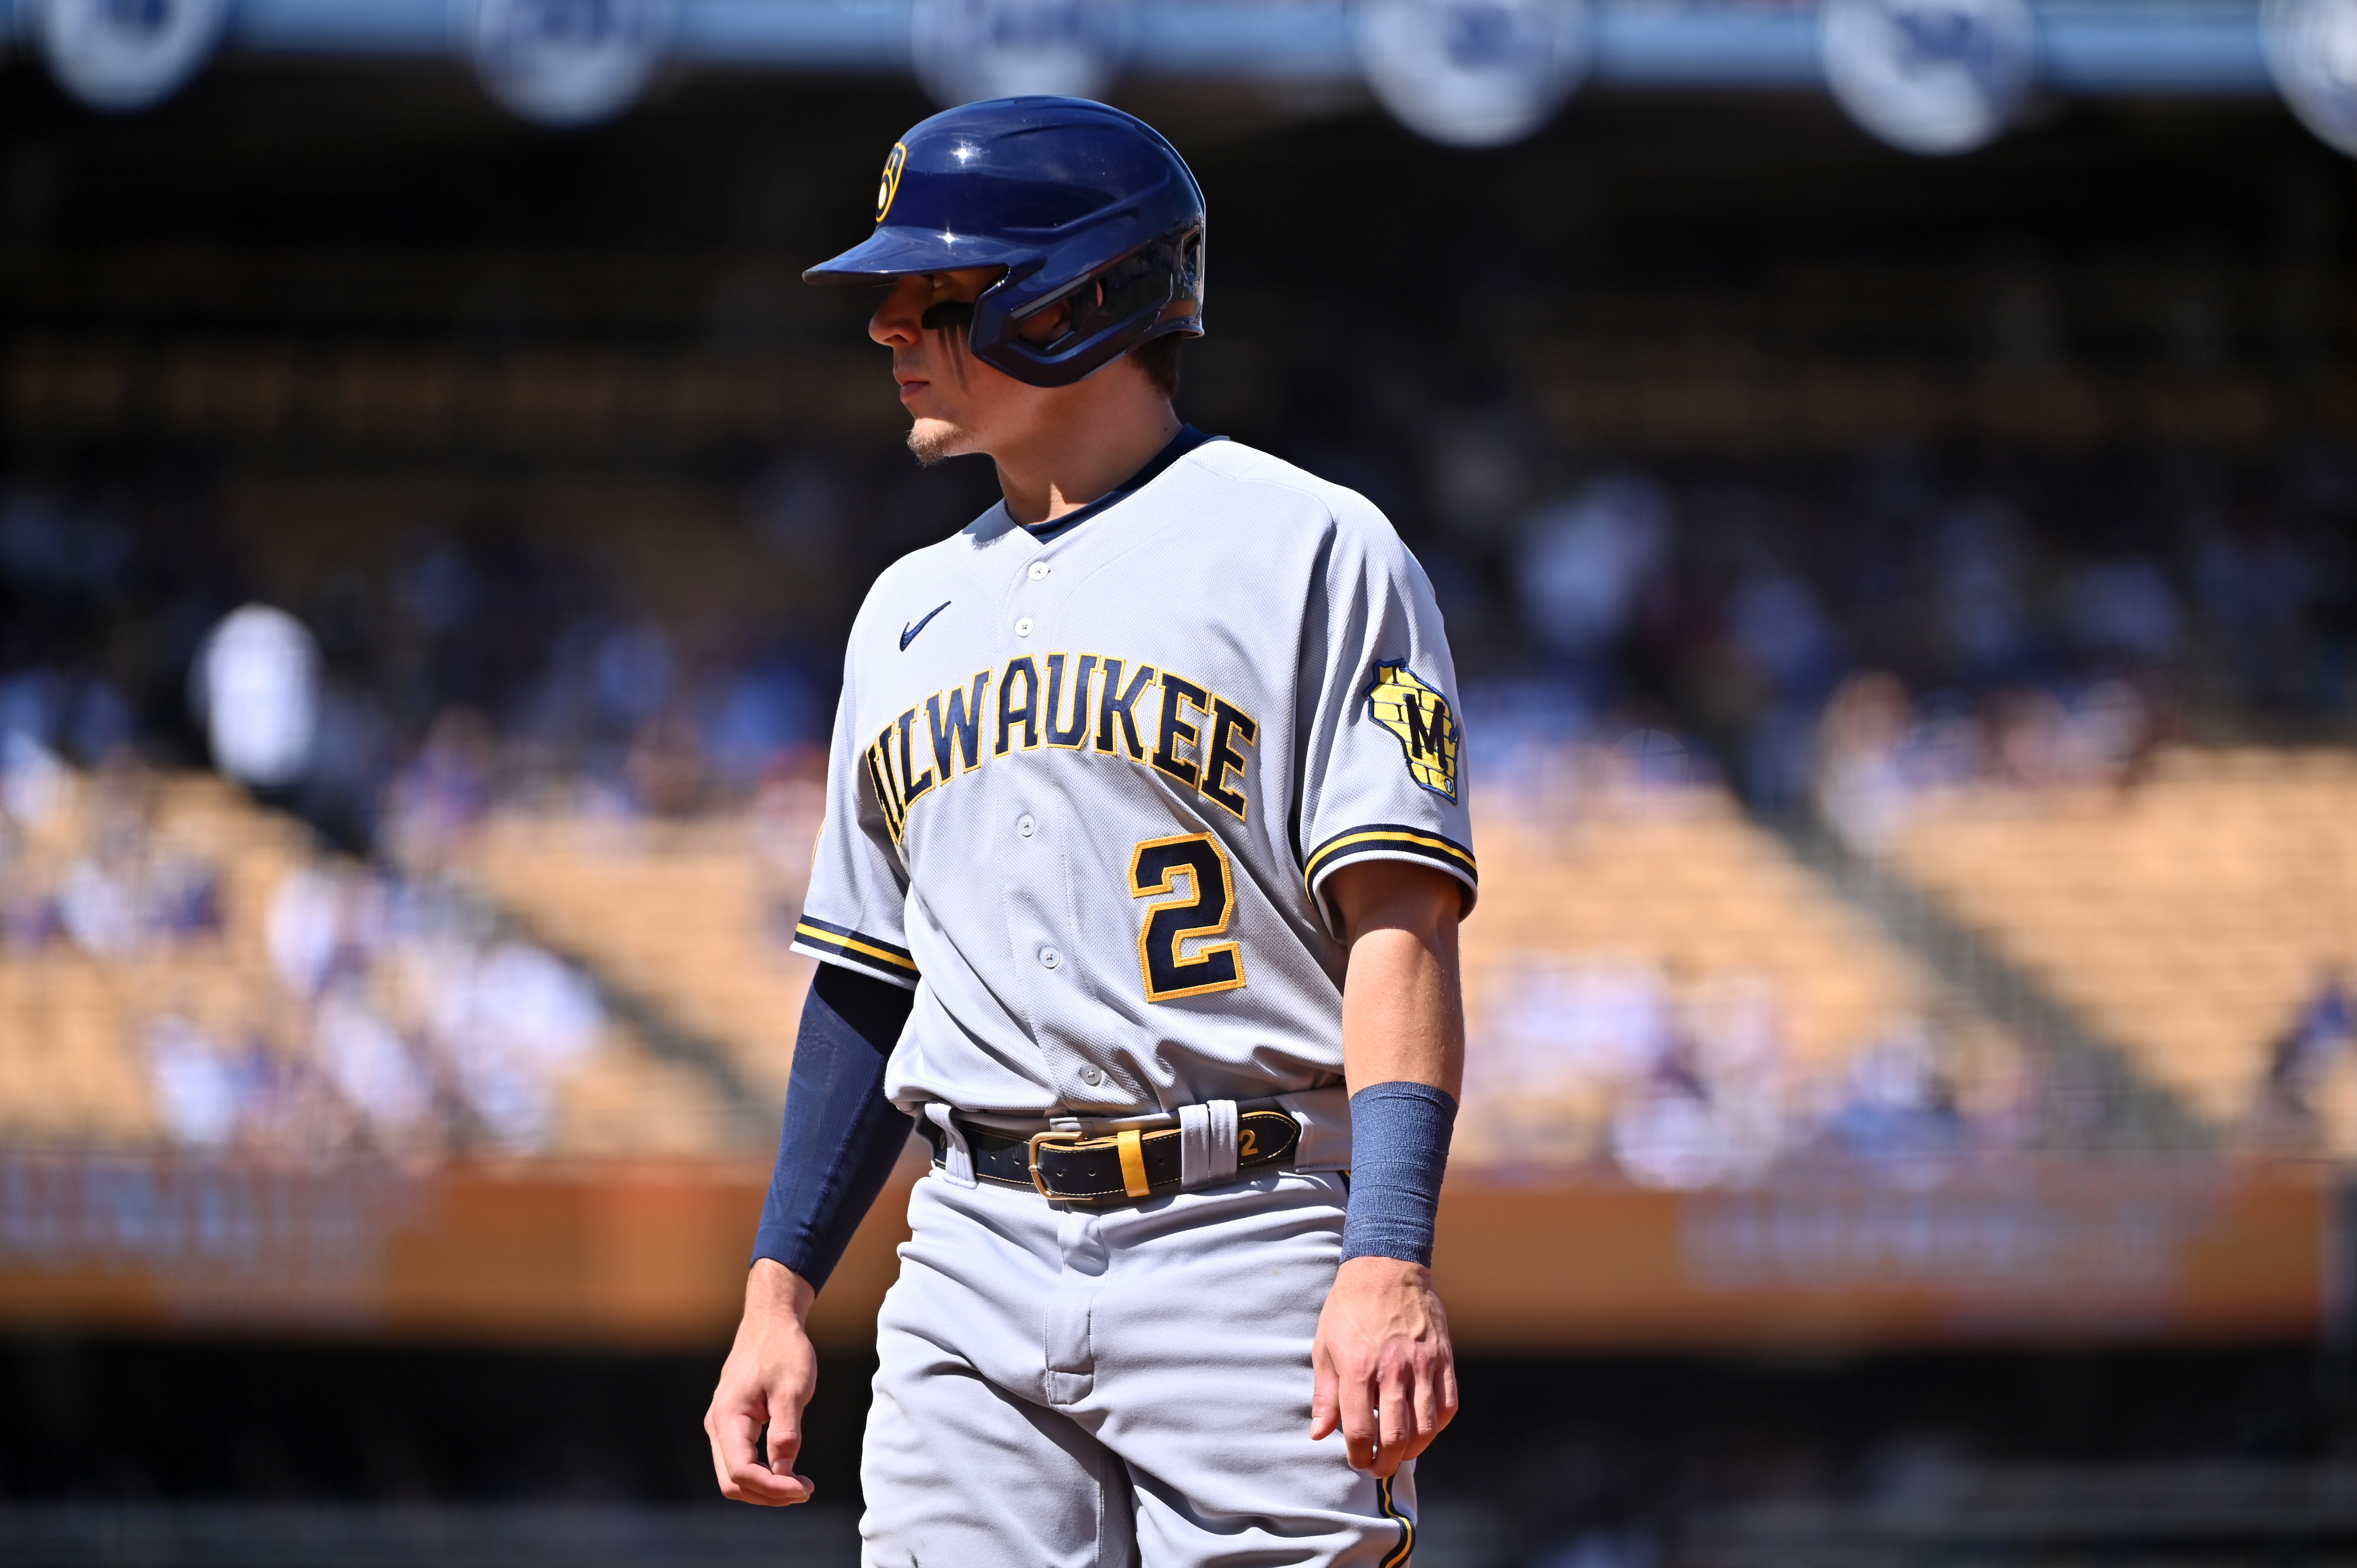 Milwaukee Brewers v Los Angeles Dodgers